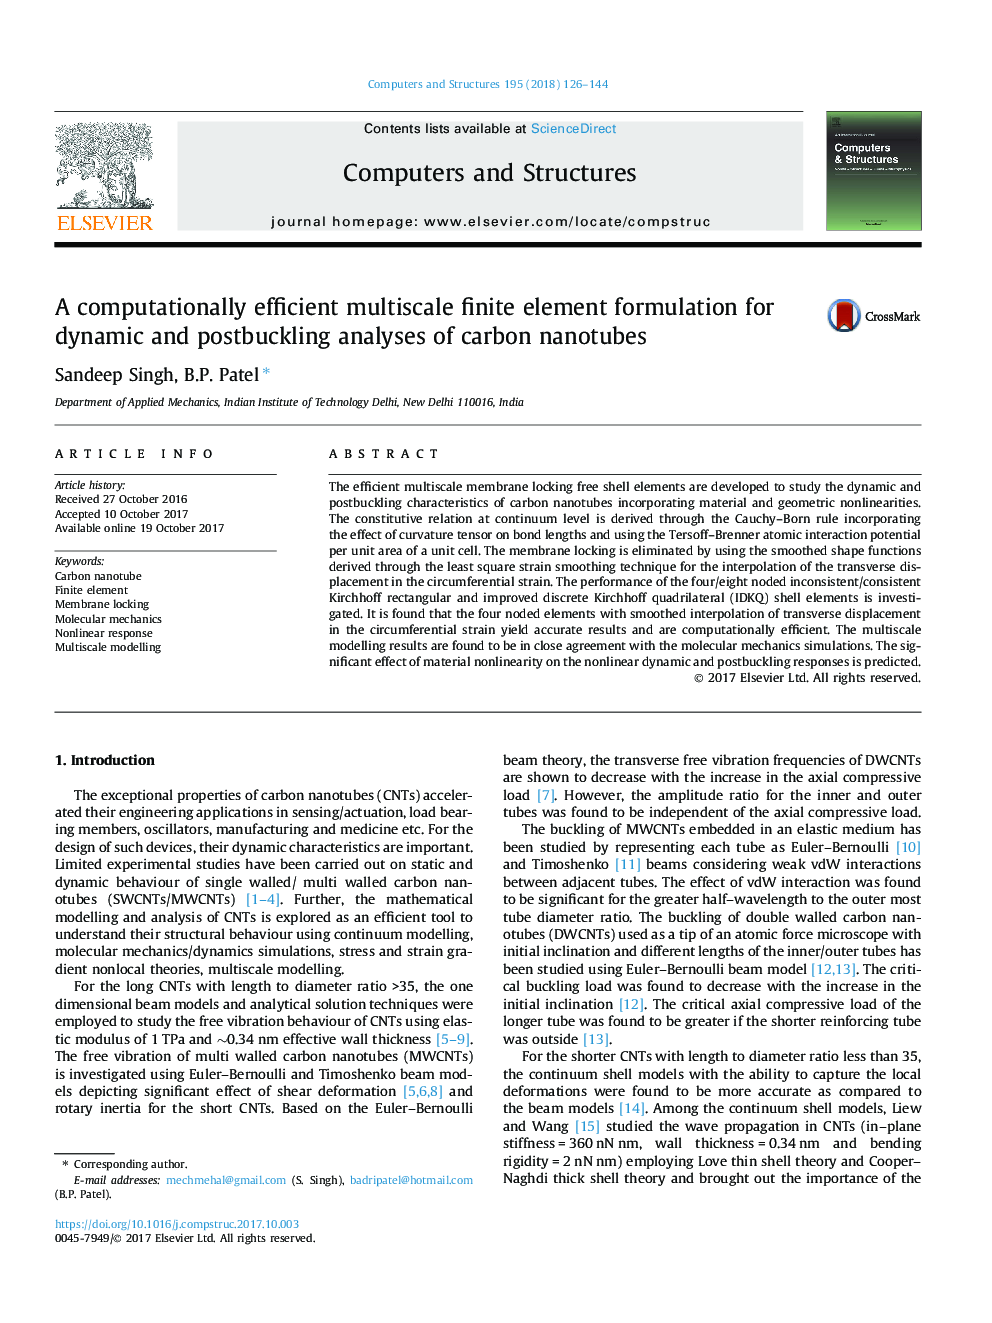 A computationally efficient multiscale finite element formulation for dynamic and postbuckling analyses of carbon nanotubes